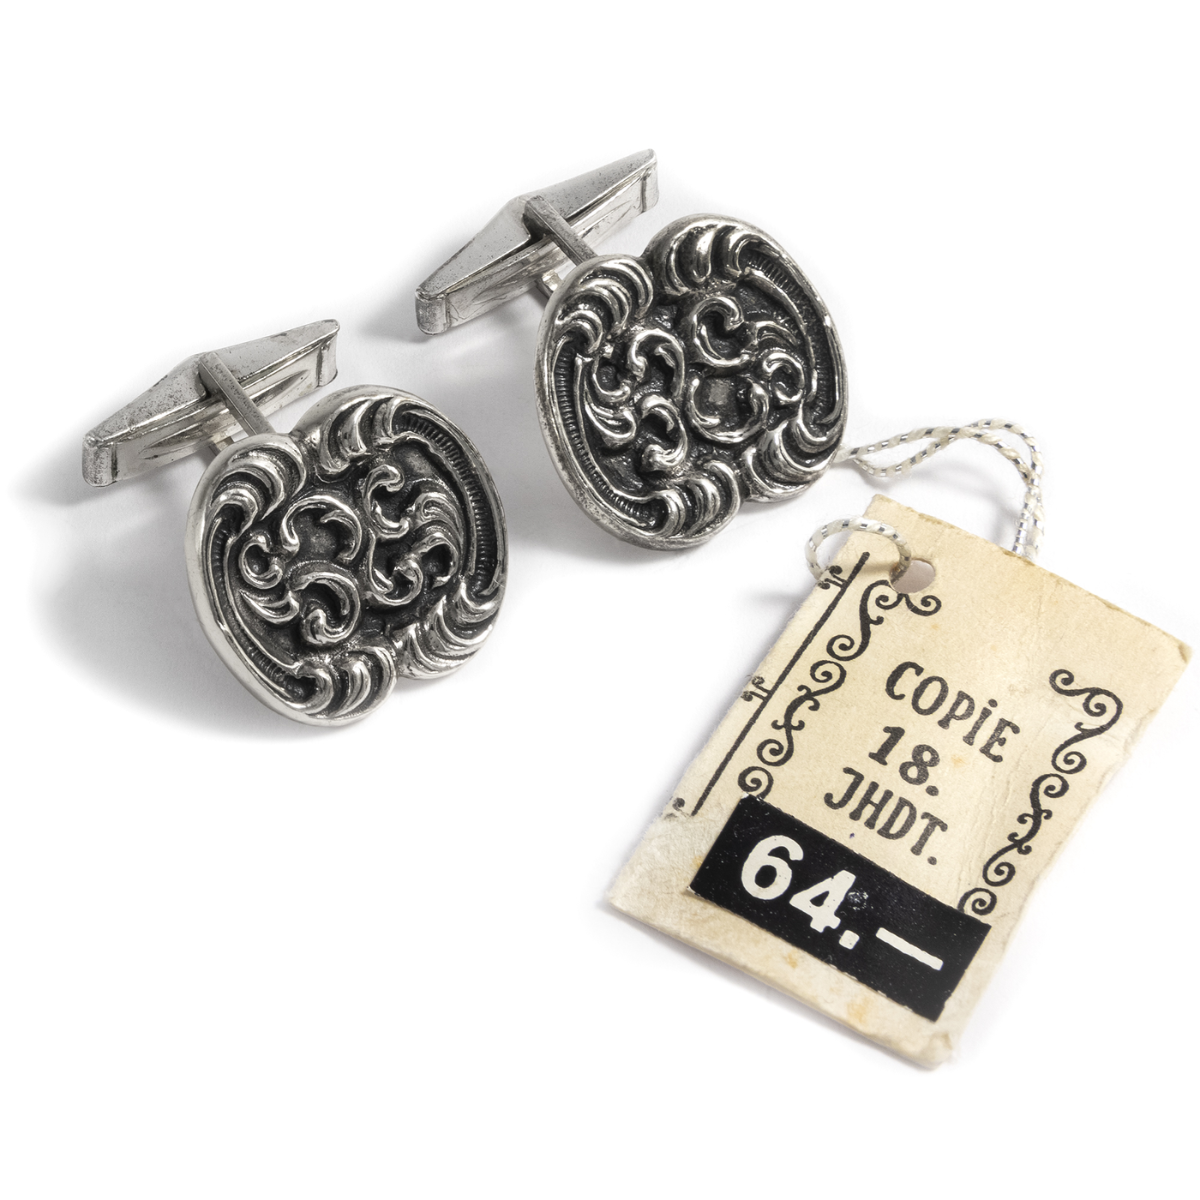 13. Vintage Inspired Cufflinks: The Perfect 2nd Anniversary Gift for Him